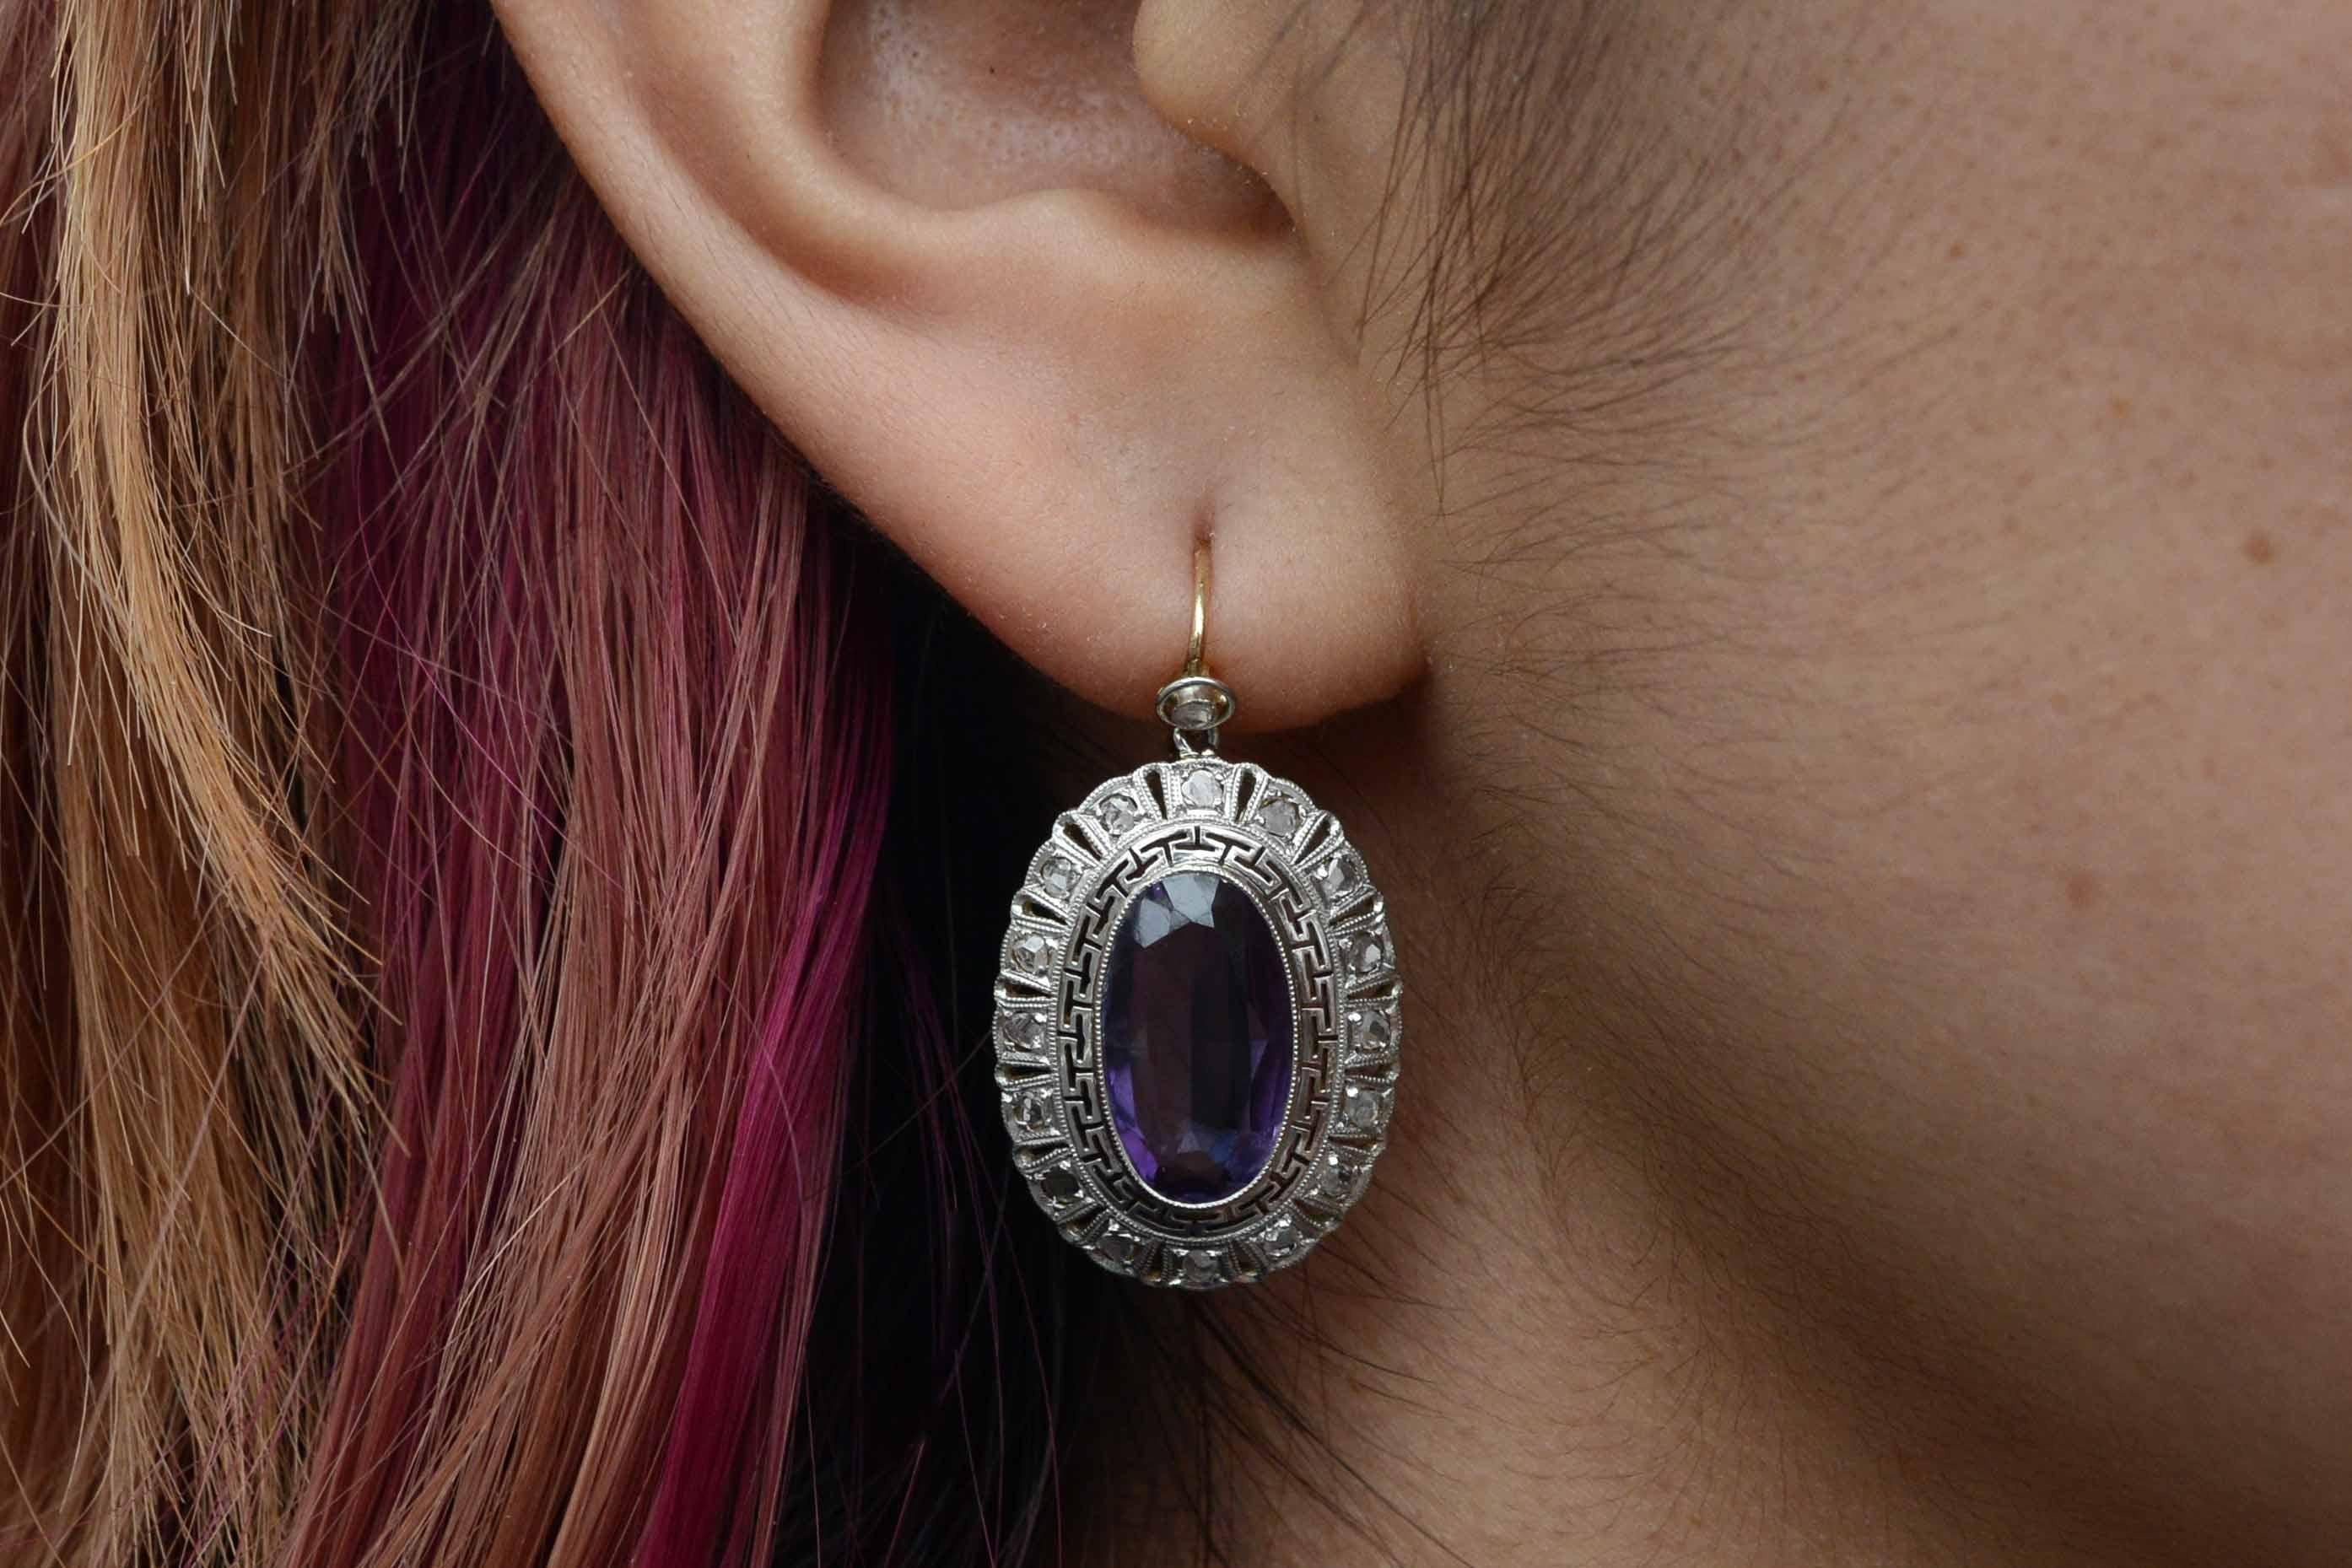 A most dramatic pair of Art Deco dangle earrings that drop so seductively and sweep your shoulders with a wonderful violet amethyst. Surrounding the velvety gemstone is a most alluring Greek key design which is framed with delicate rose cut diamonds